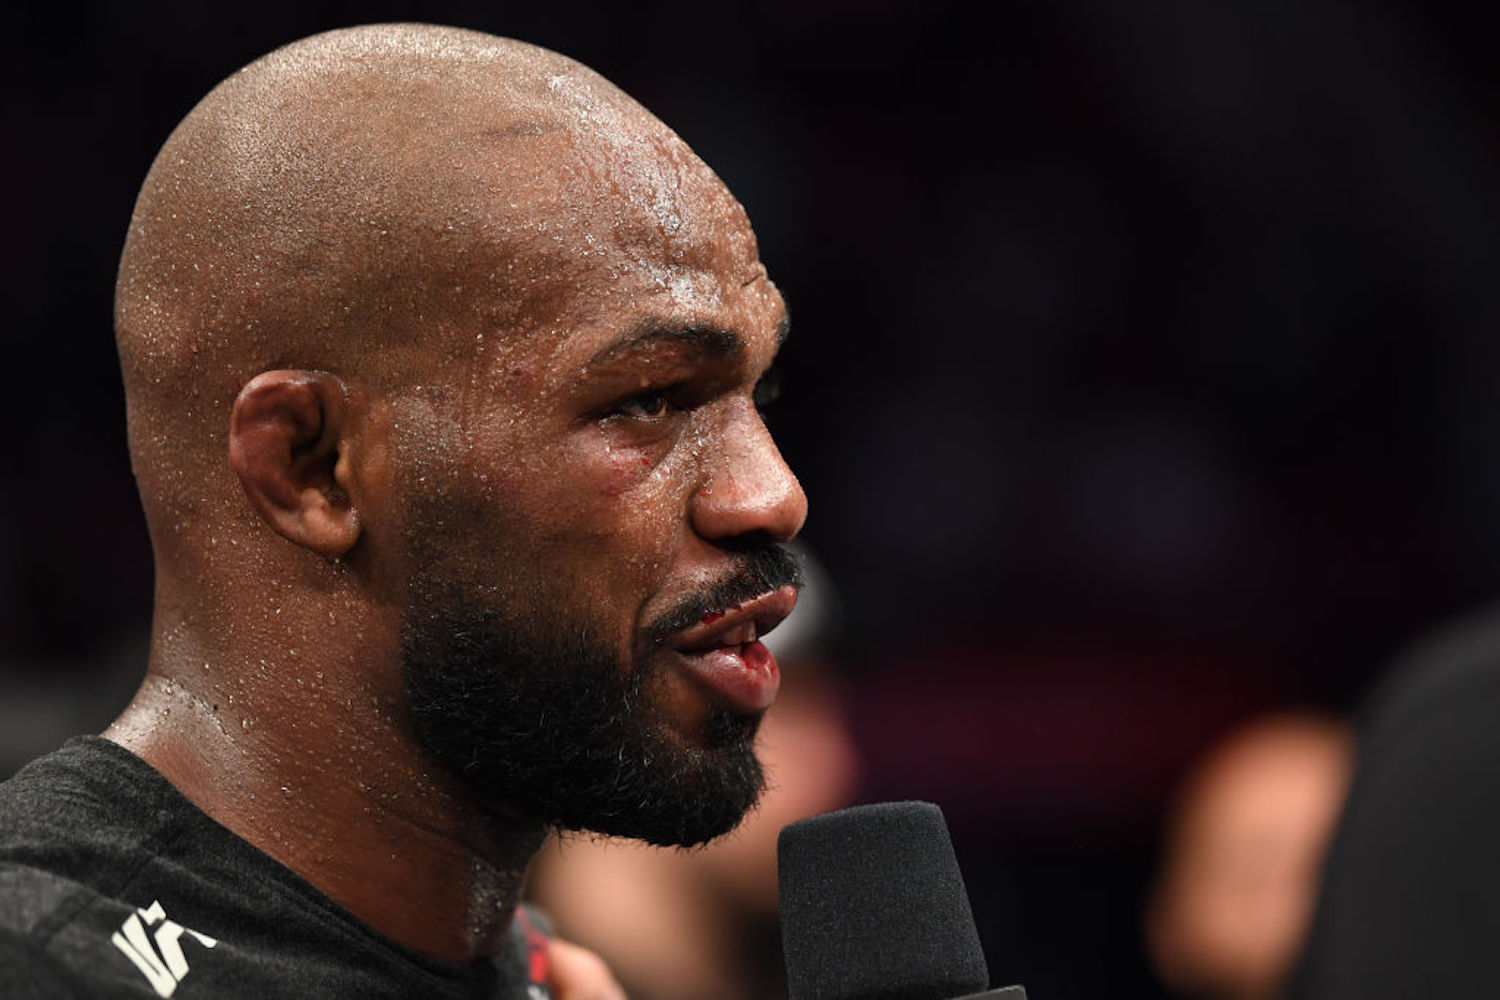 Jon Jones and Israel Adesanya aren't exactly best friends, and Jones just called out his rival with a violent message.